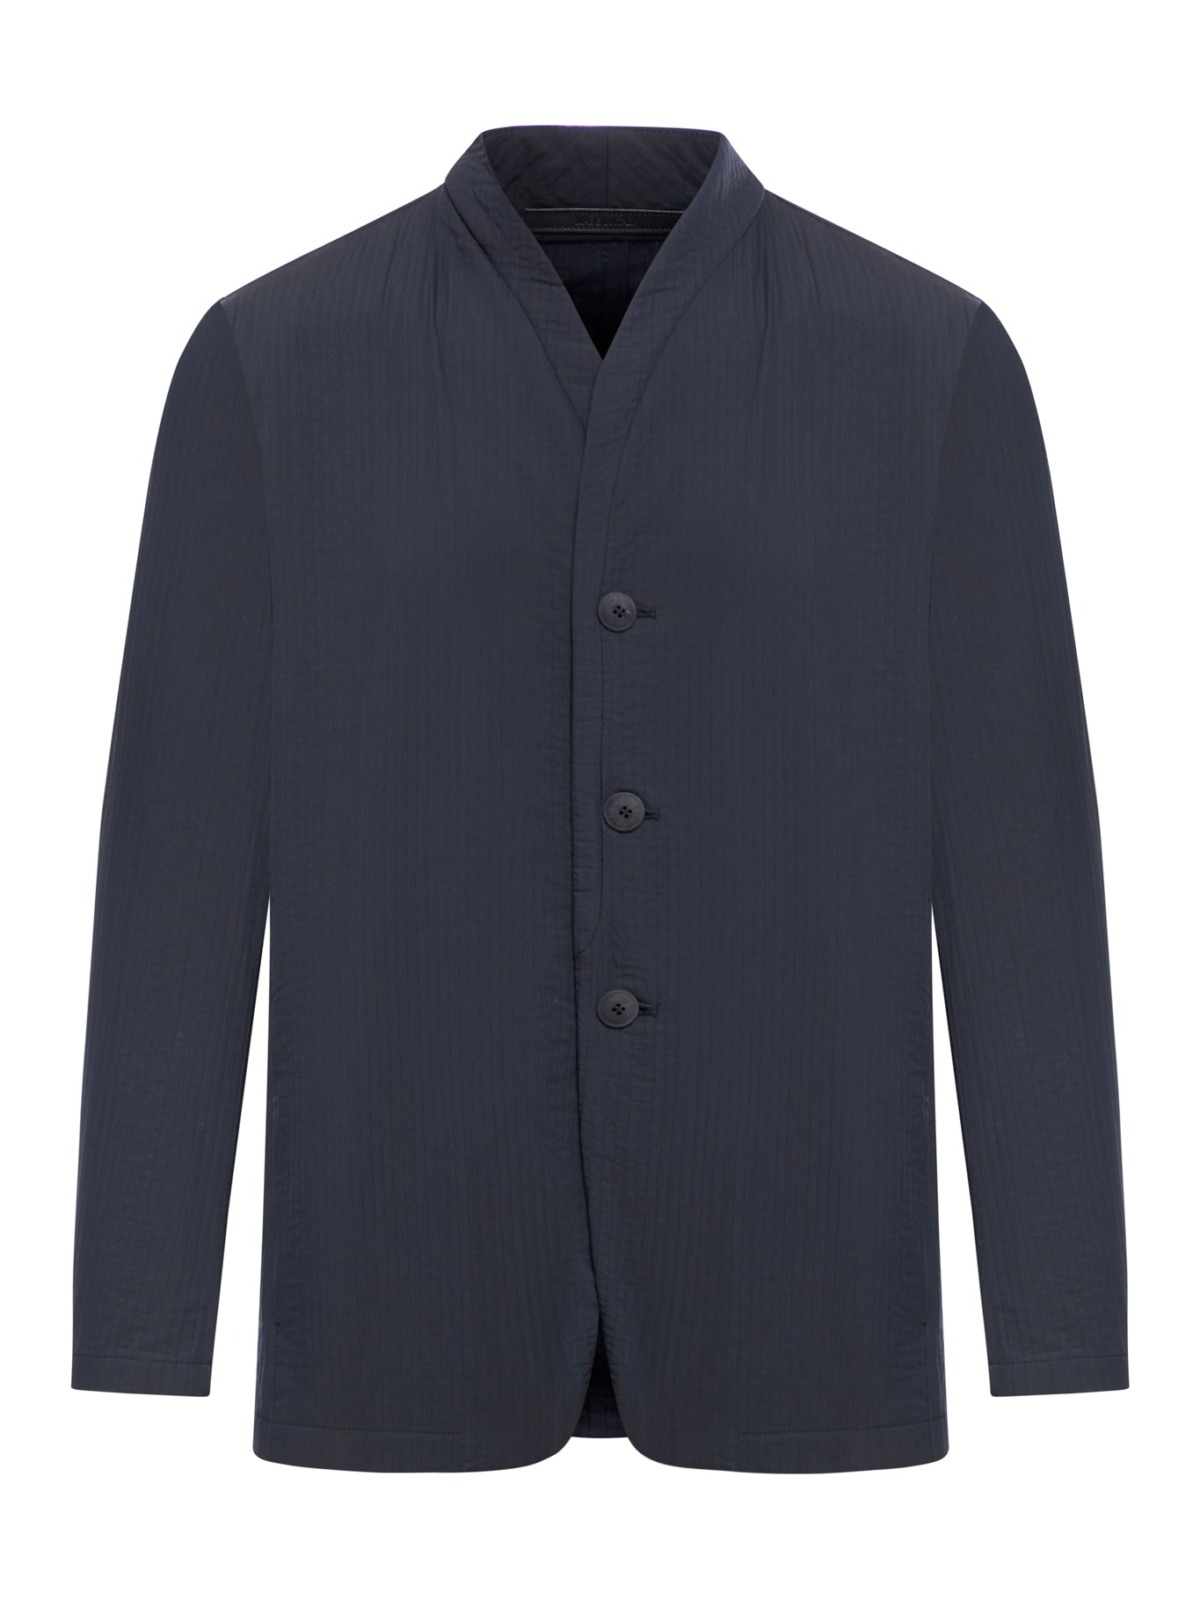 Armani - Men's Jacket in Blue from Suitnegozi GOOFASH